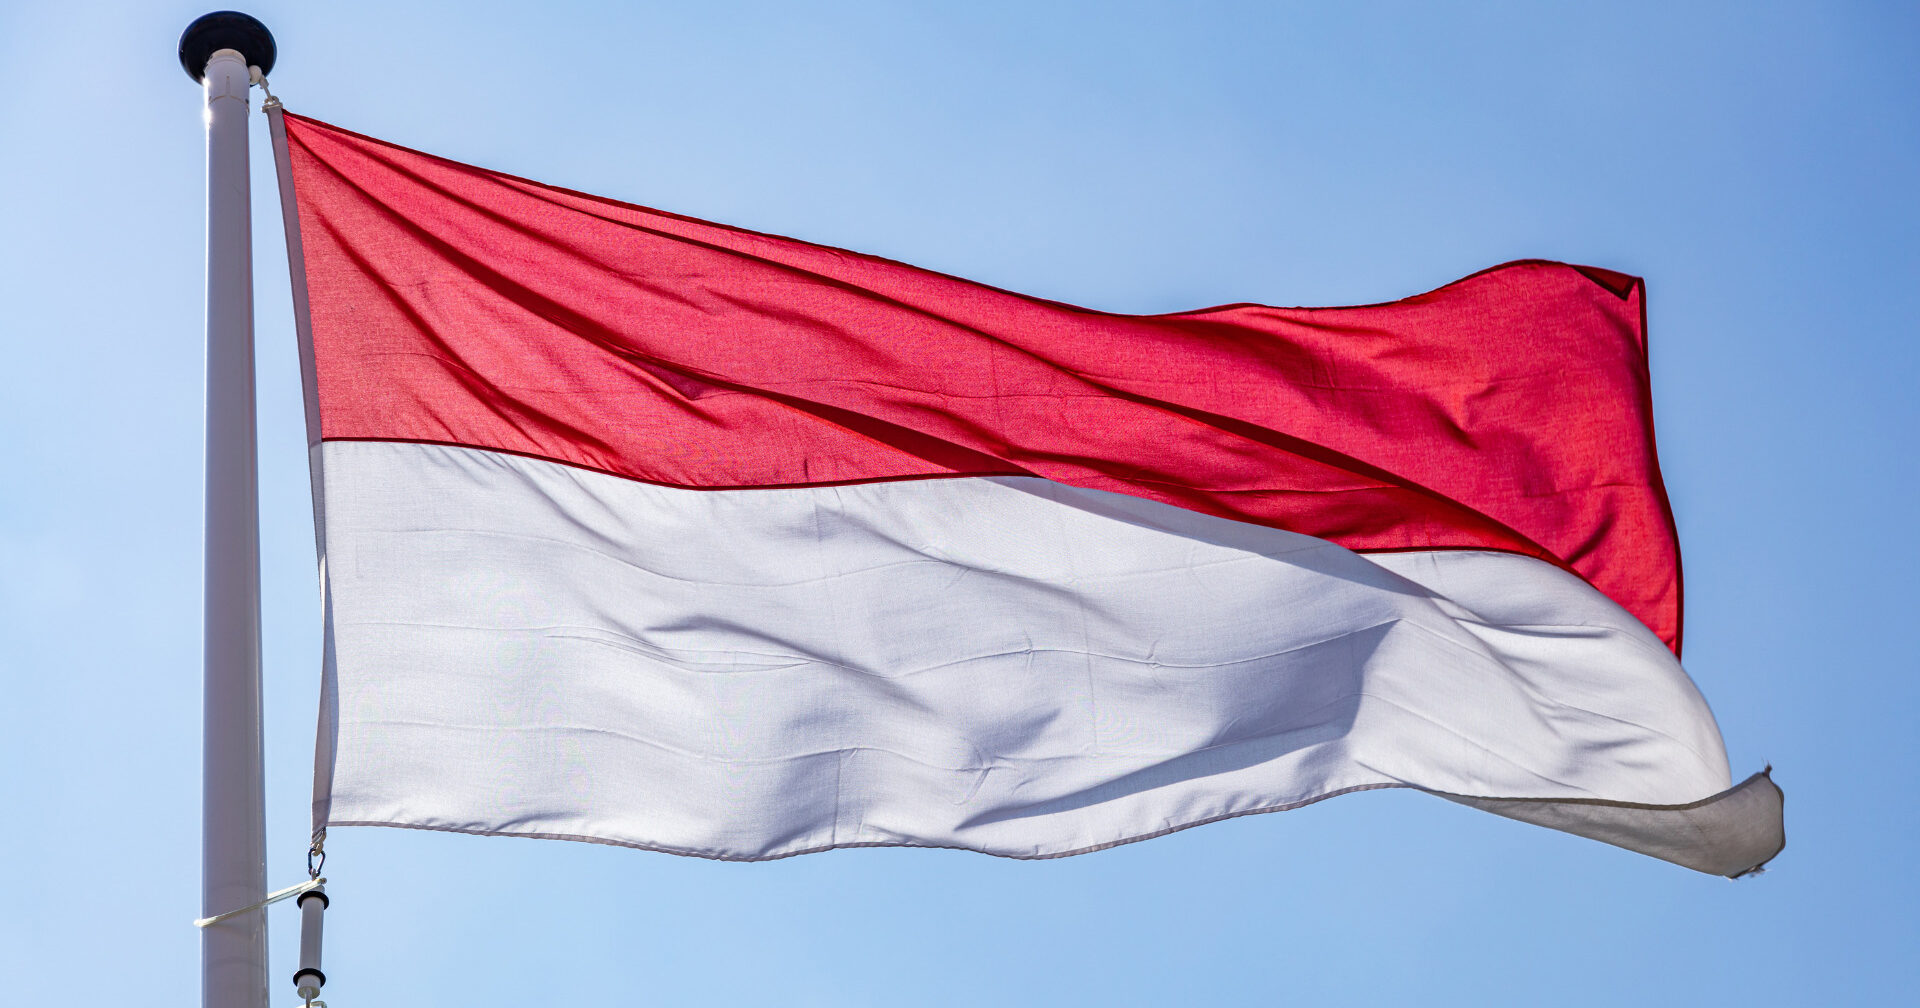 THE INDONESIAN GOVERNMENT WILL IMPLEMENT A “NEW NORMAL” POLICY TO DEAL WITH THE COVID-19 SITUATION